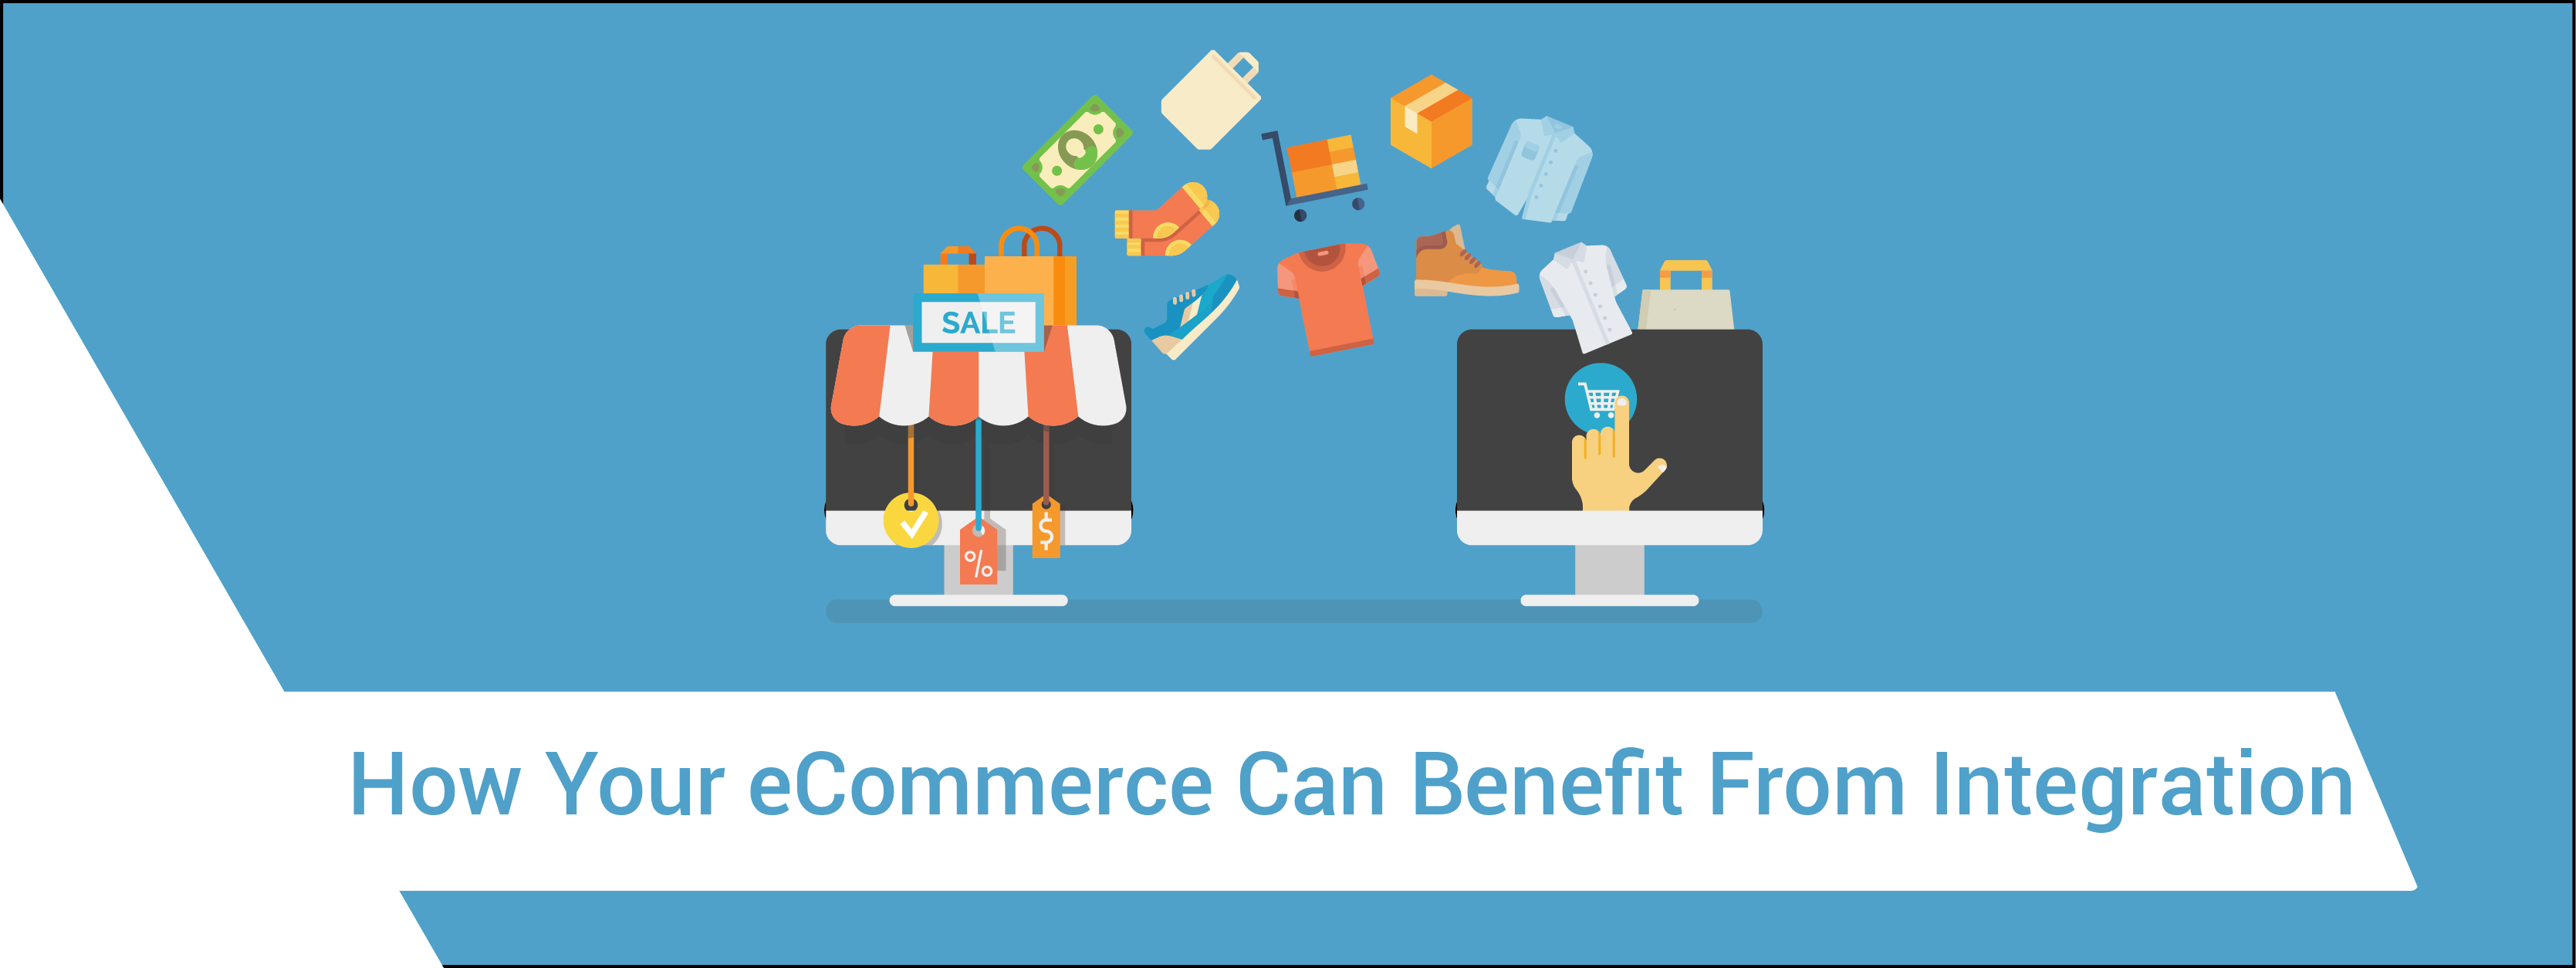 how your ecommerce can benefit from integration